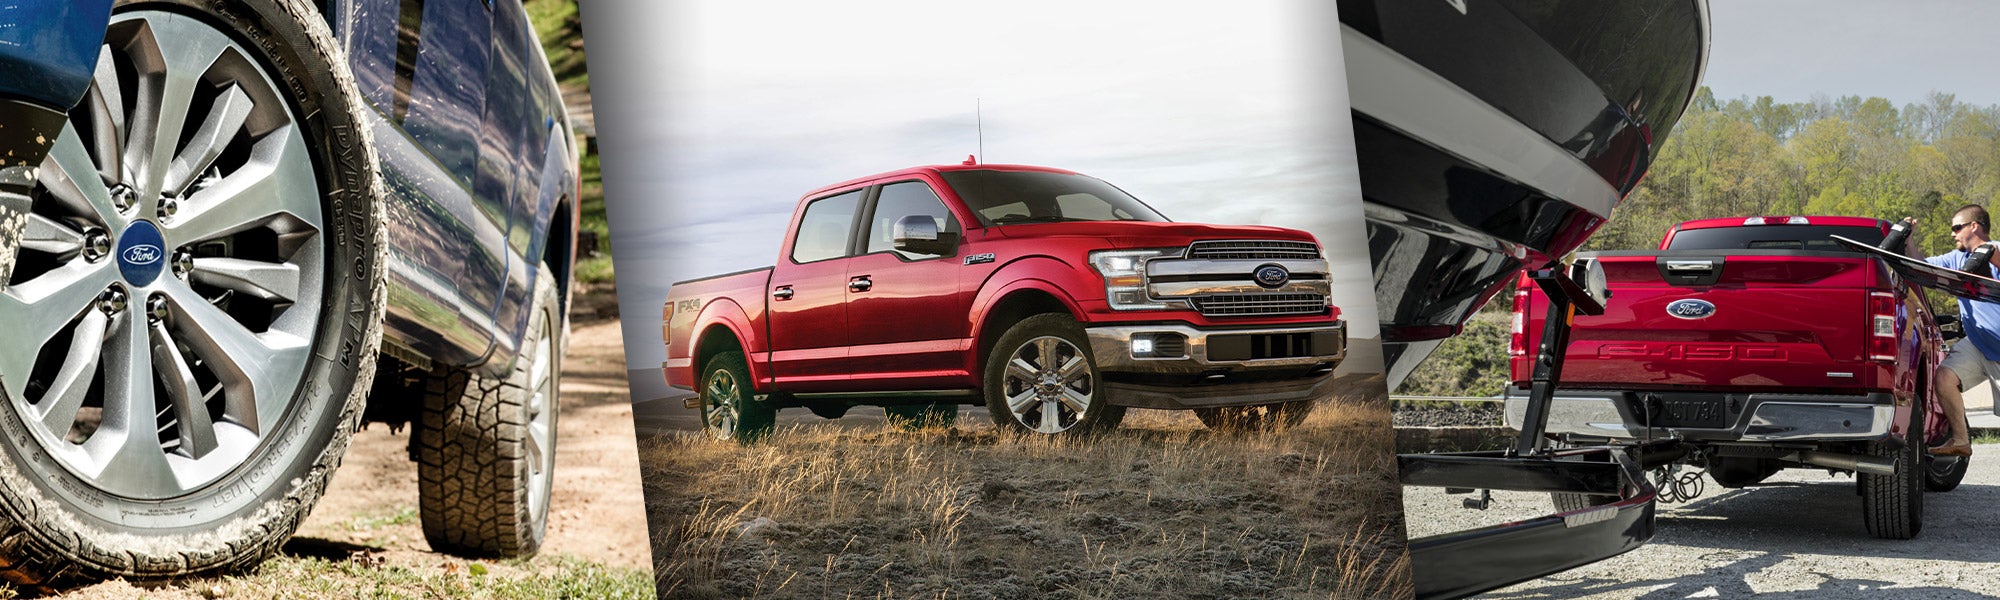 2020 Ford F-150 | Towing Capacity | McCandless Ford Meadville 2020 Ford F 150 3.0 Diesel Towing Capacity